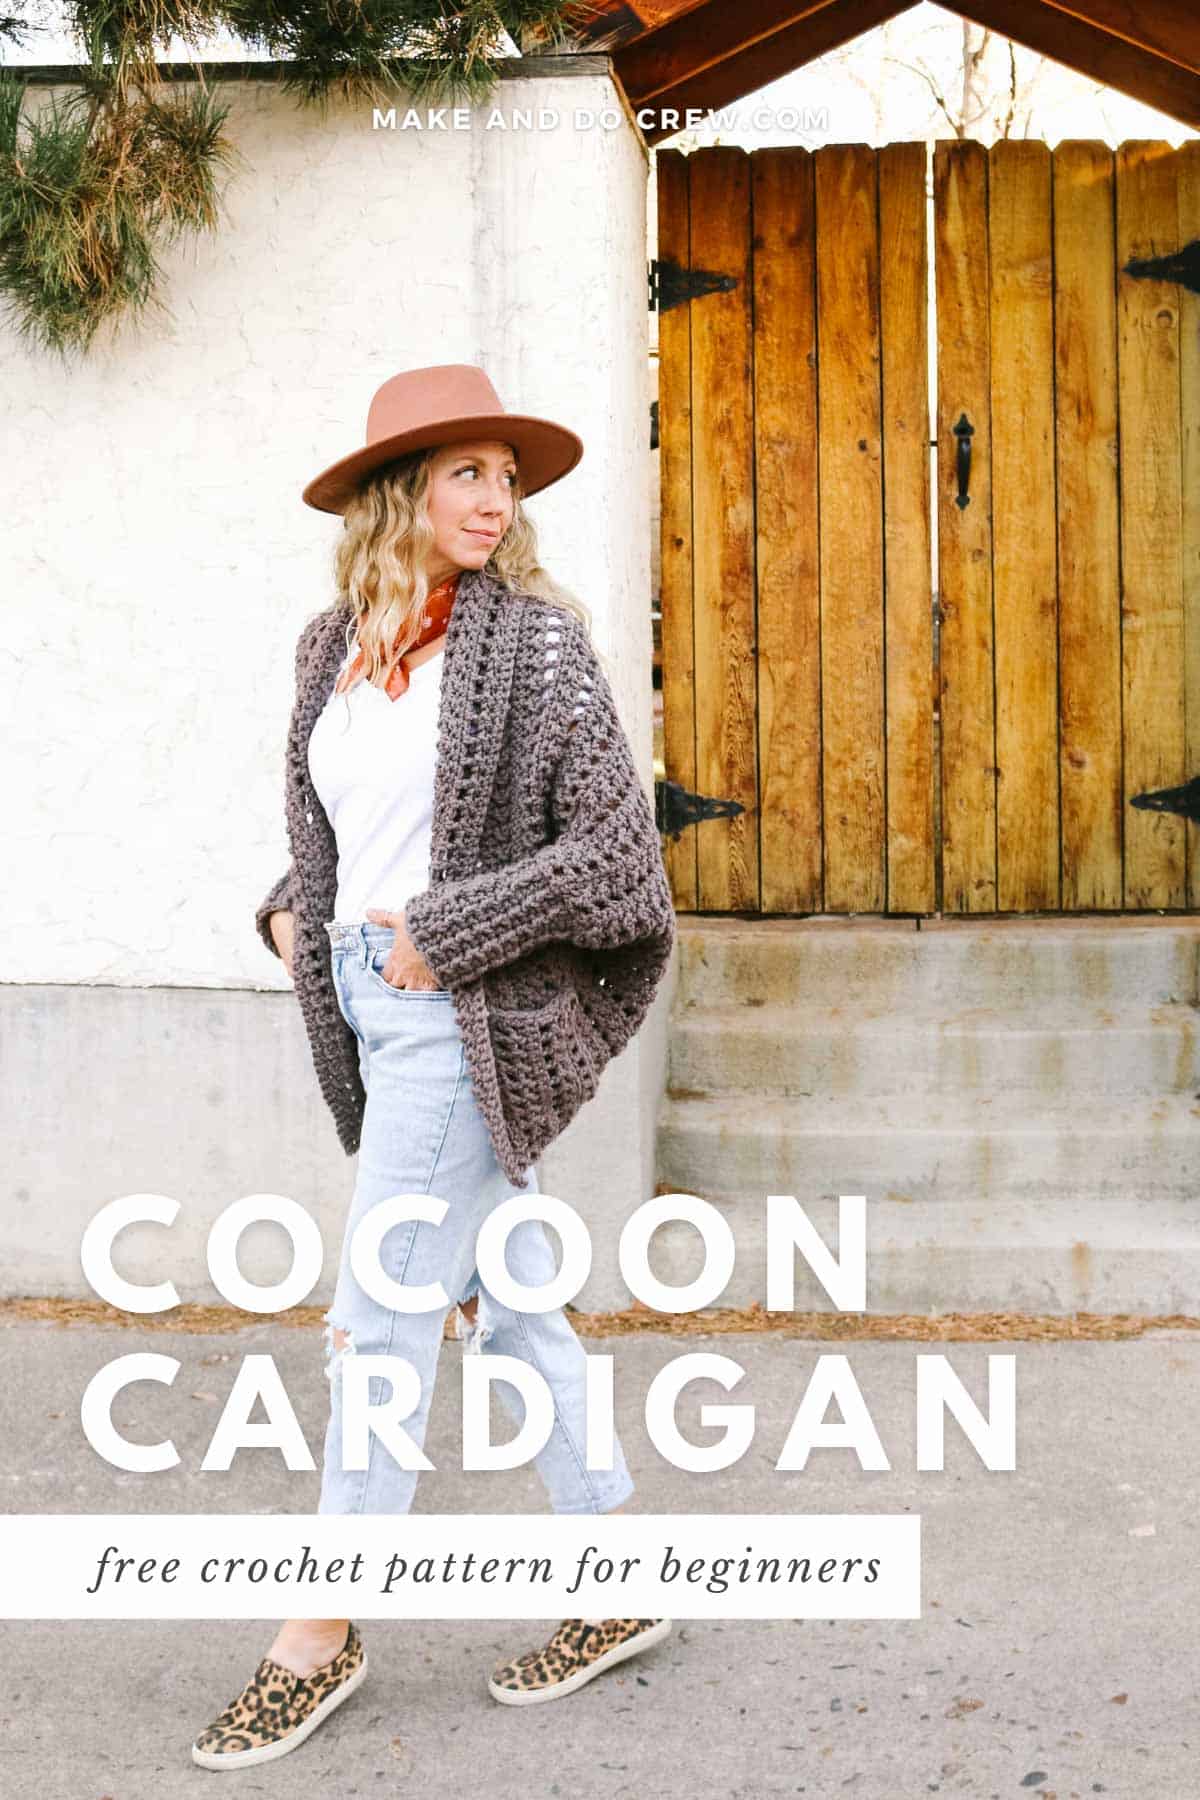 This image shows a blonde woman standing in front of a gate and a white wall. She is wearing a brownish grayish crochet cardigan with pockets, light blue jeans, a white shirt and a tan hat. Her hands are in her pockets and she is looking over her left shoulder.